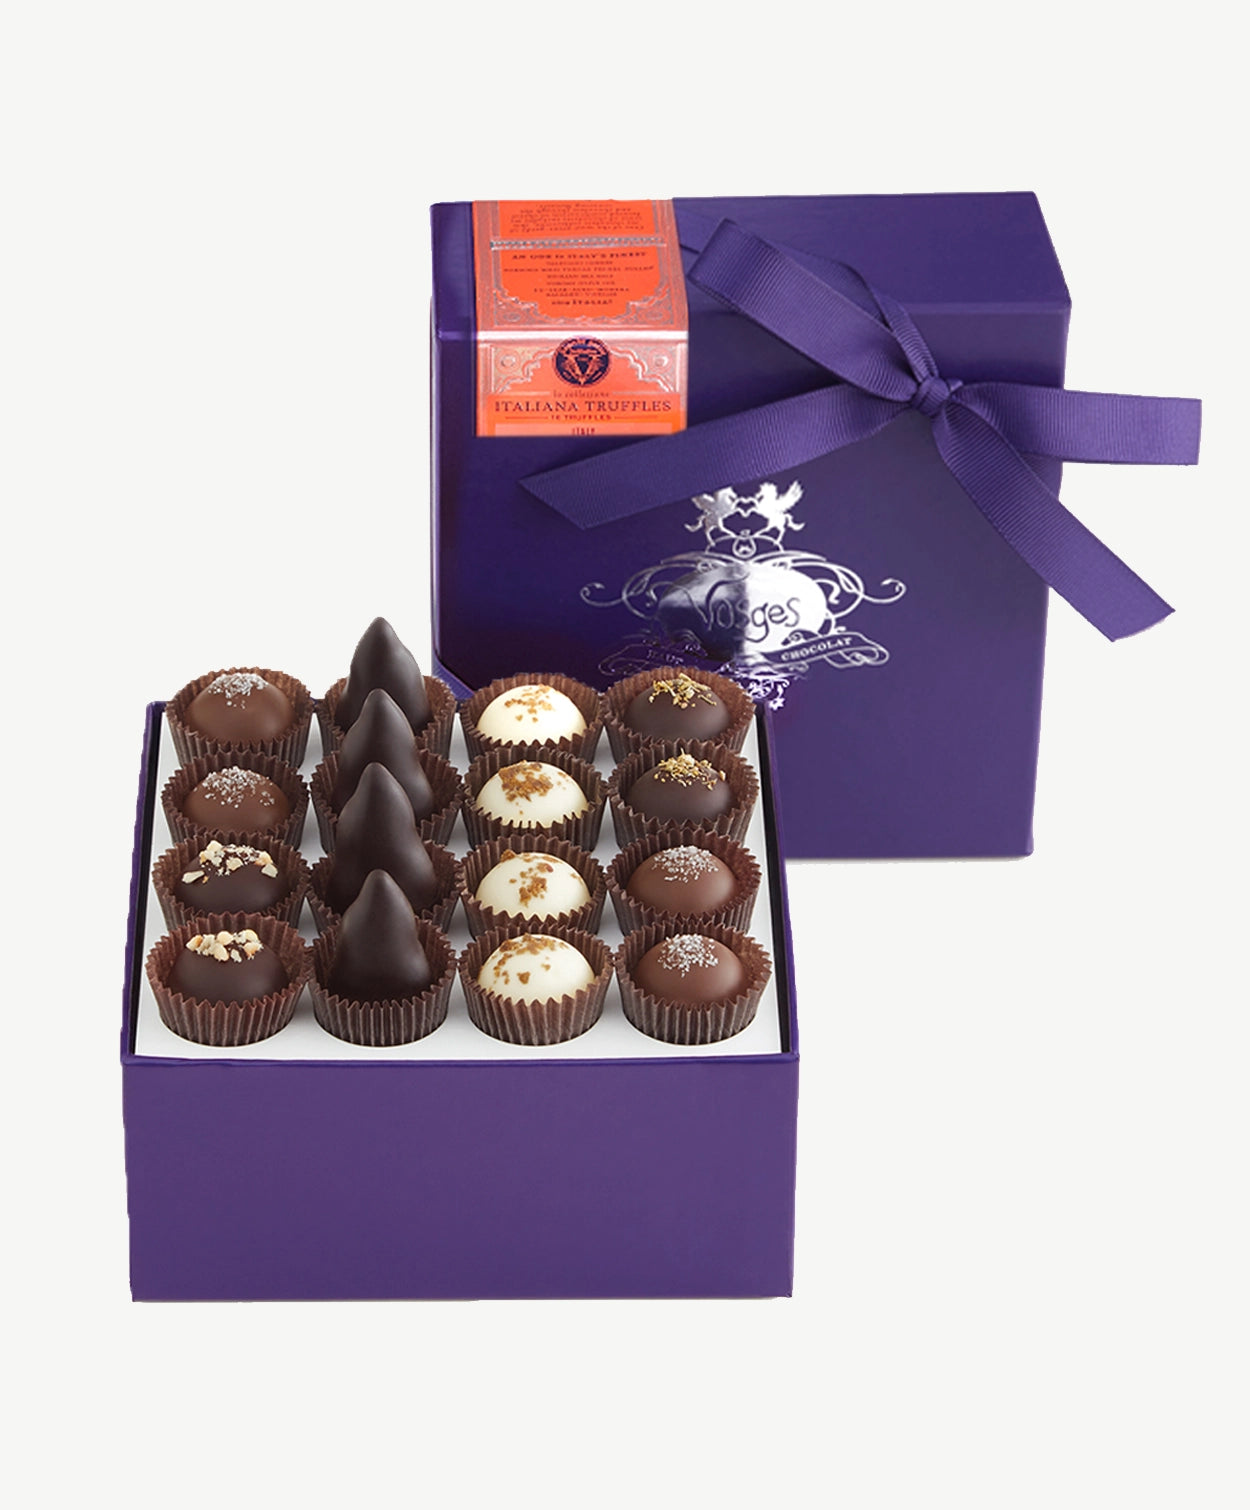 Purple chocolate box embossed with silver foil sits upright displaying four rows of Vosges Italian Truffles on a grey background.  